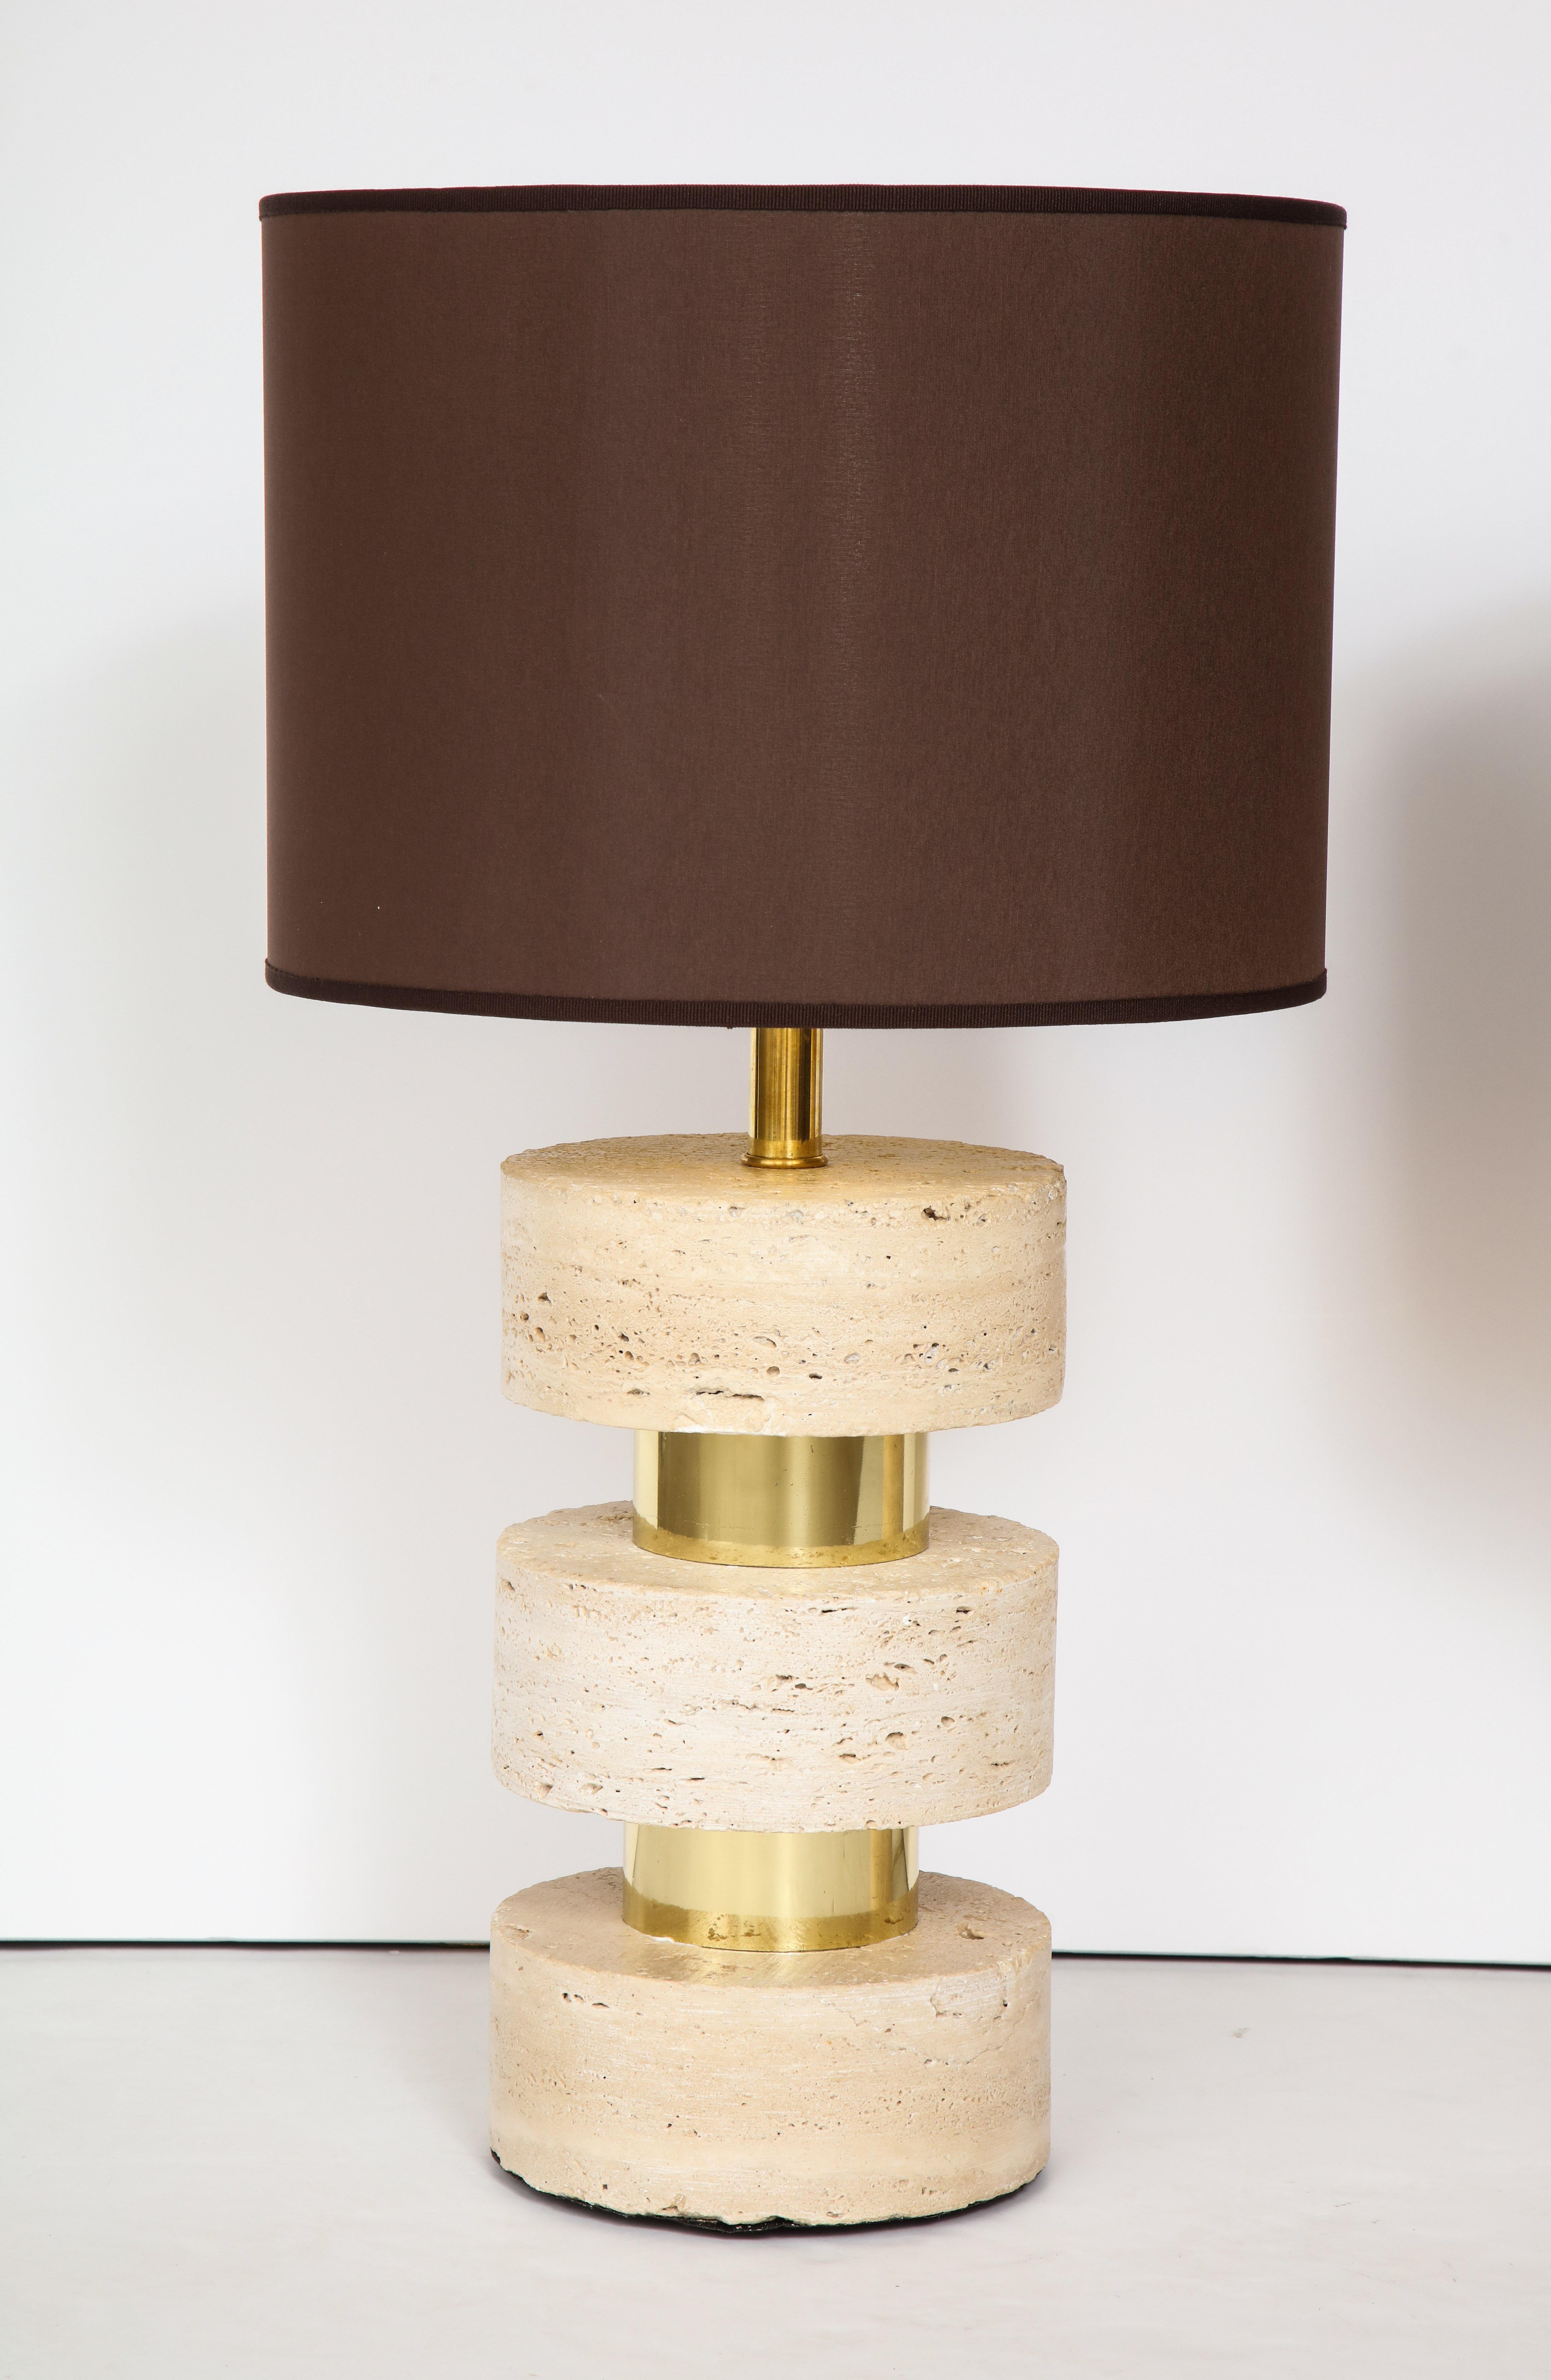 Pair of Italian 1970s travertine and brass table lamps, the three circular travertine blocks interspersed by brass banding. (Of very heavy weight). Re-wired for USA standards. (With custom chocolate brown silk shades with gold interior; included if